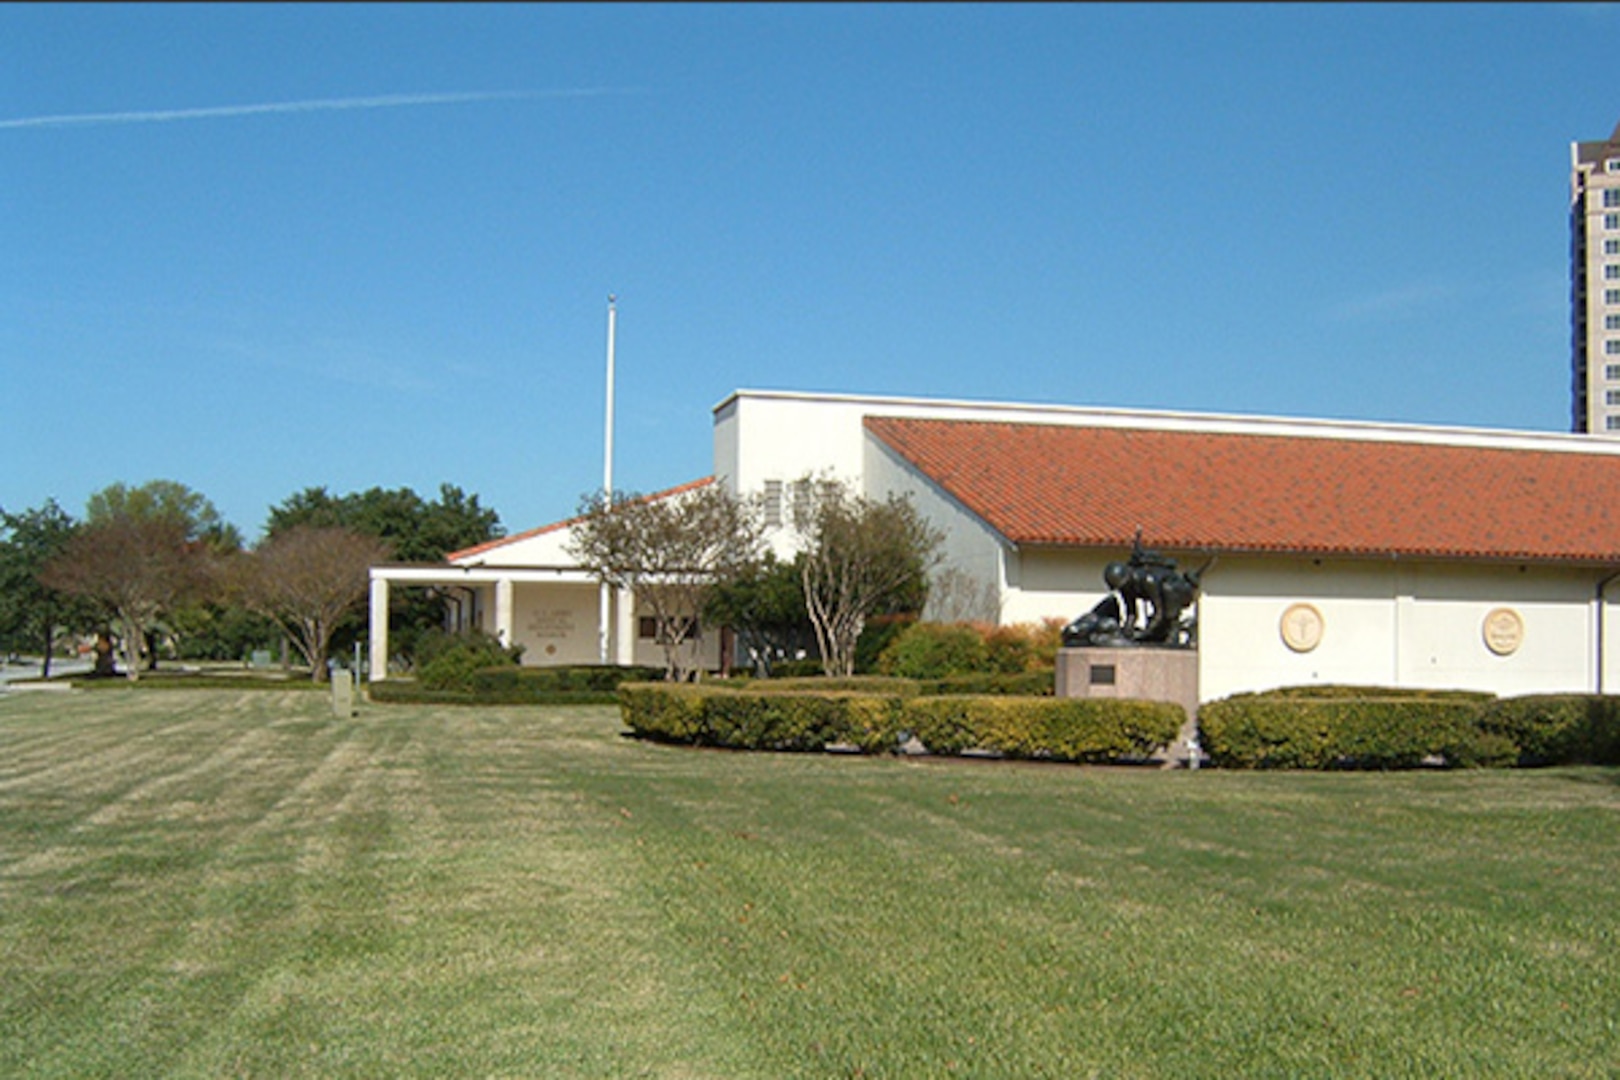 The United States Army Medical Department Museum, or AMEDD Museum